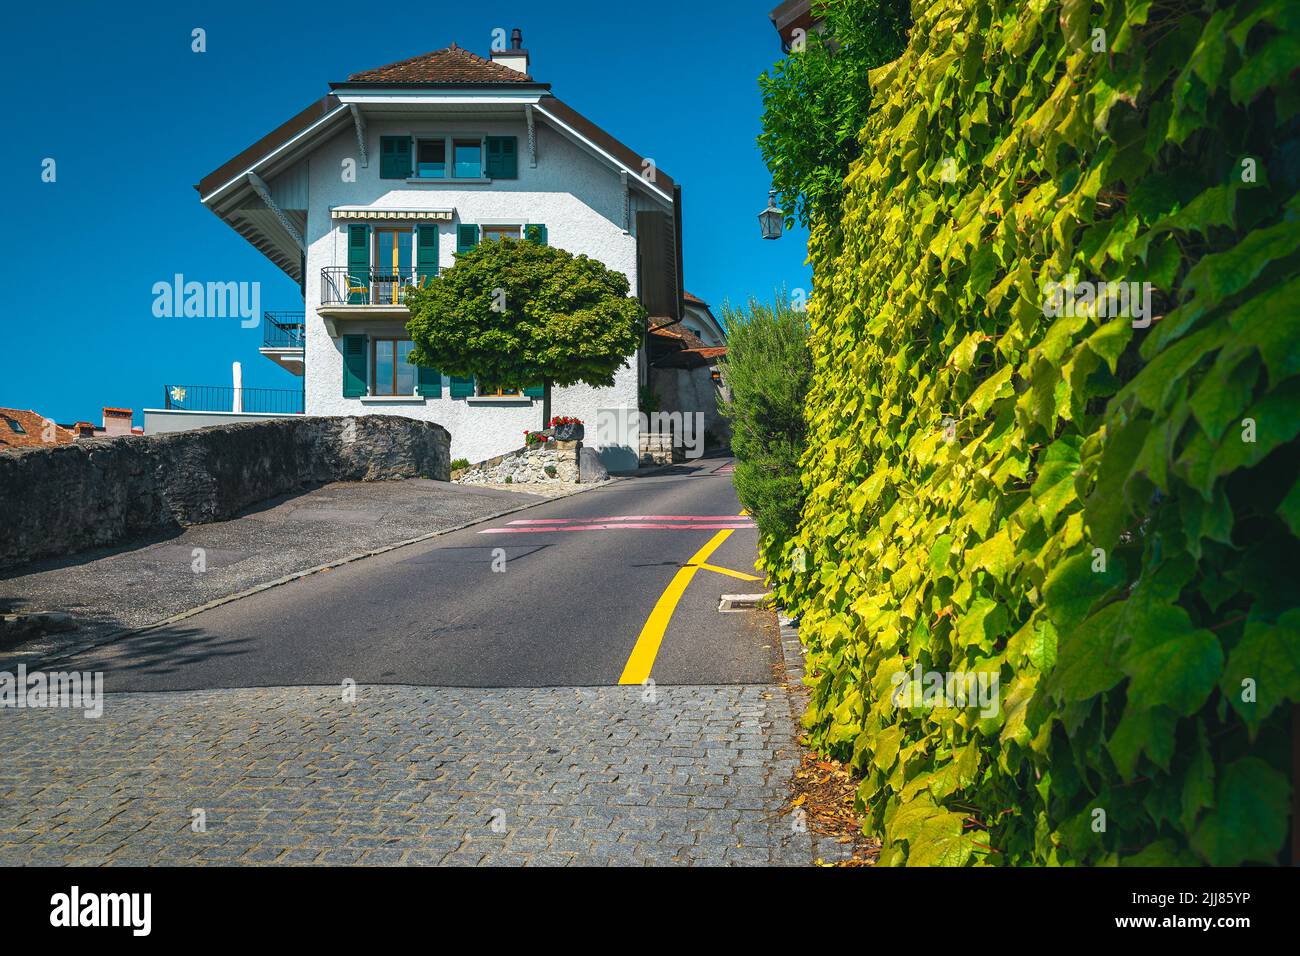 Swiss village street view with traditional house and beautiful green plants on the wall, Switzerland, Europe Stock Photo